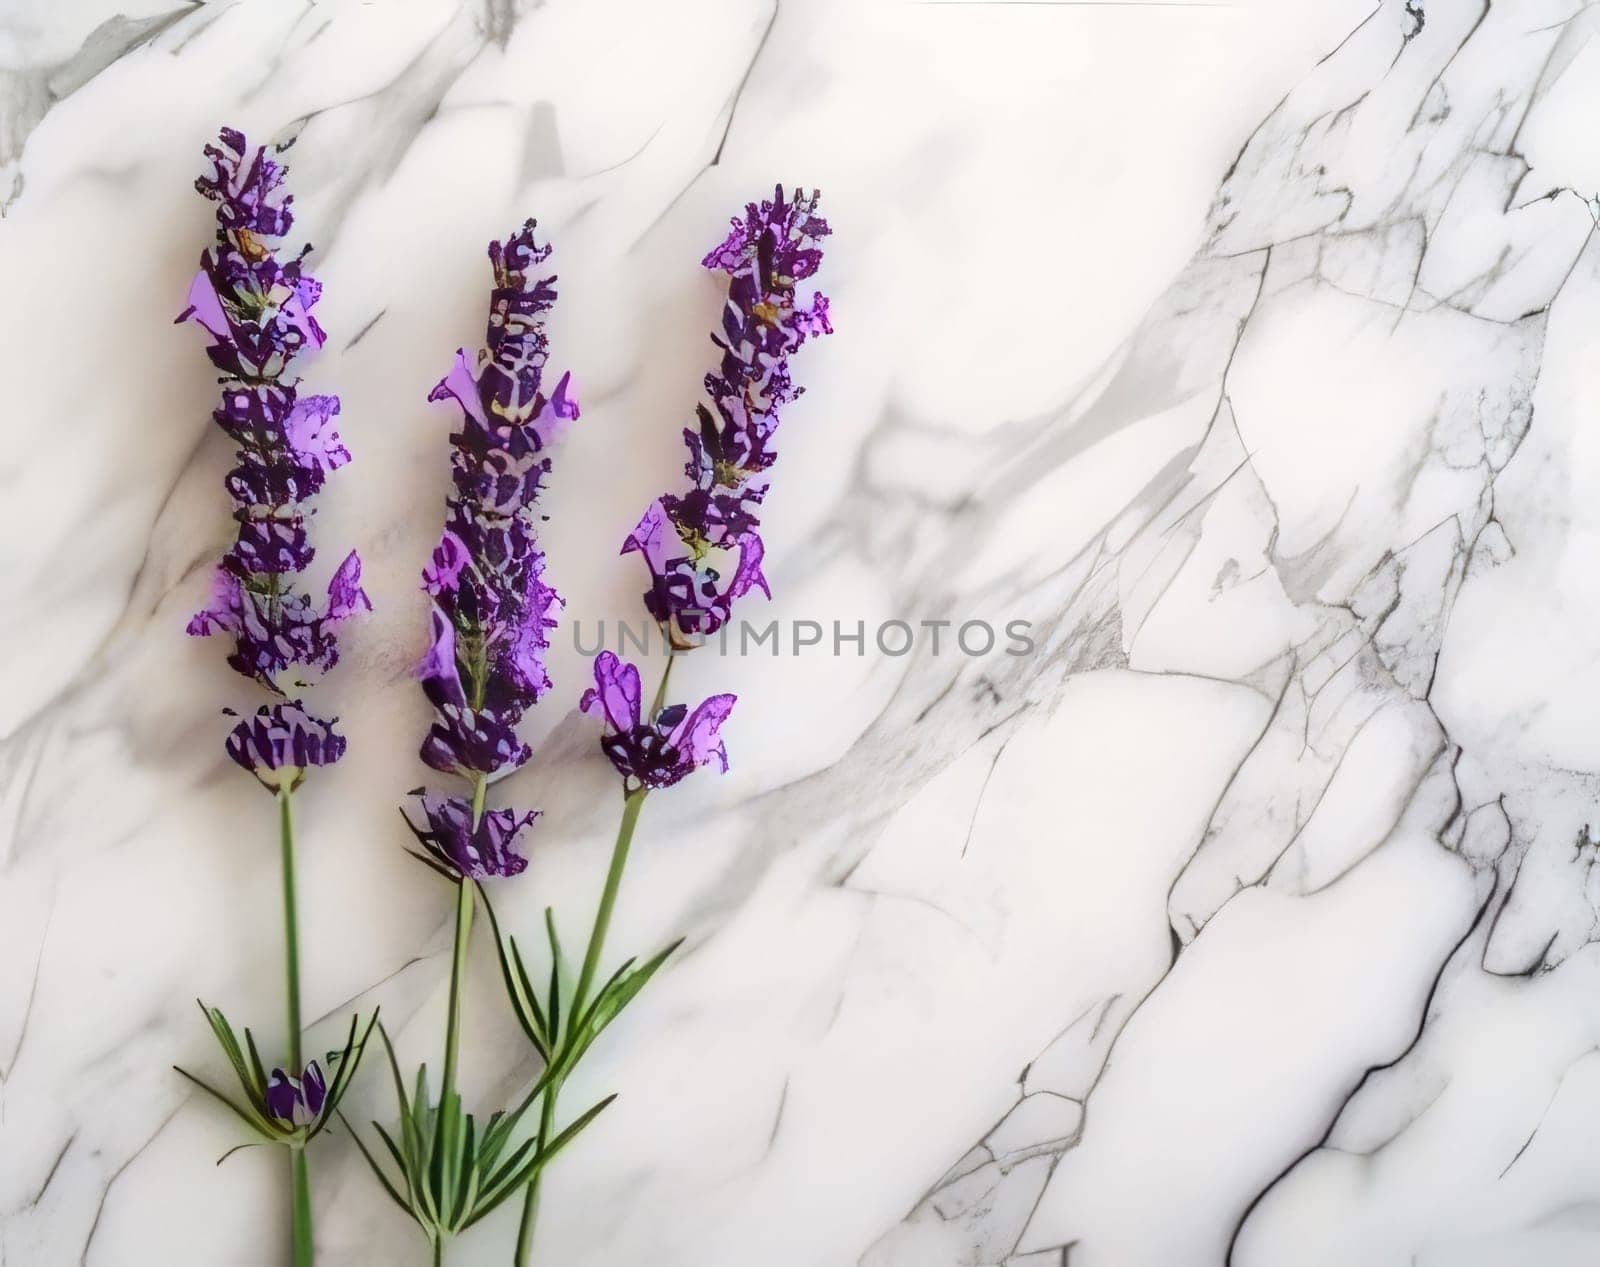 Bouquet of lavender flowers lying on a marble background. Flowering flowers, a symbol of spring, new life. A joyful time of nature awakening to life.